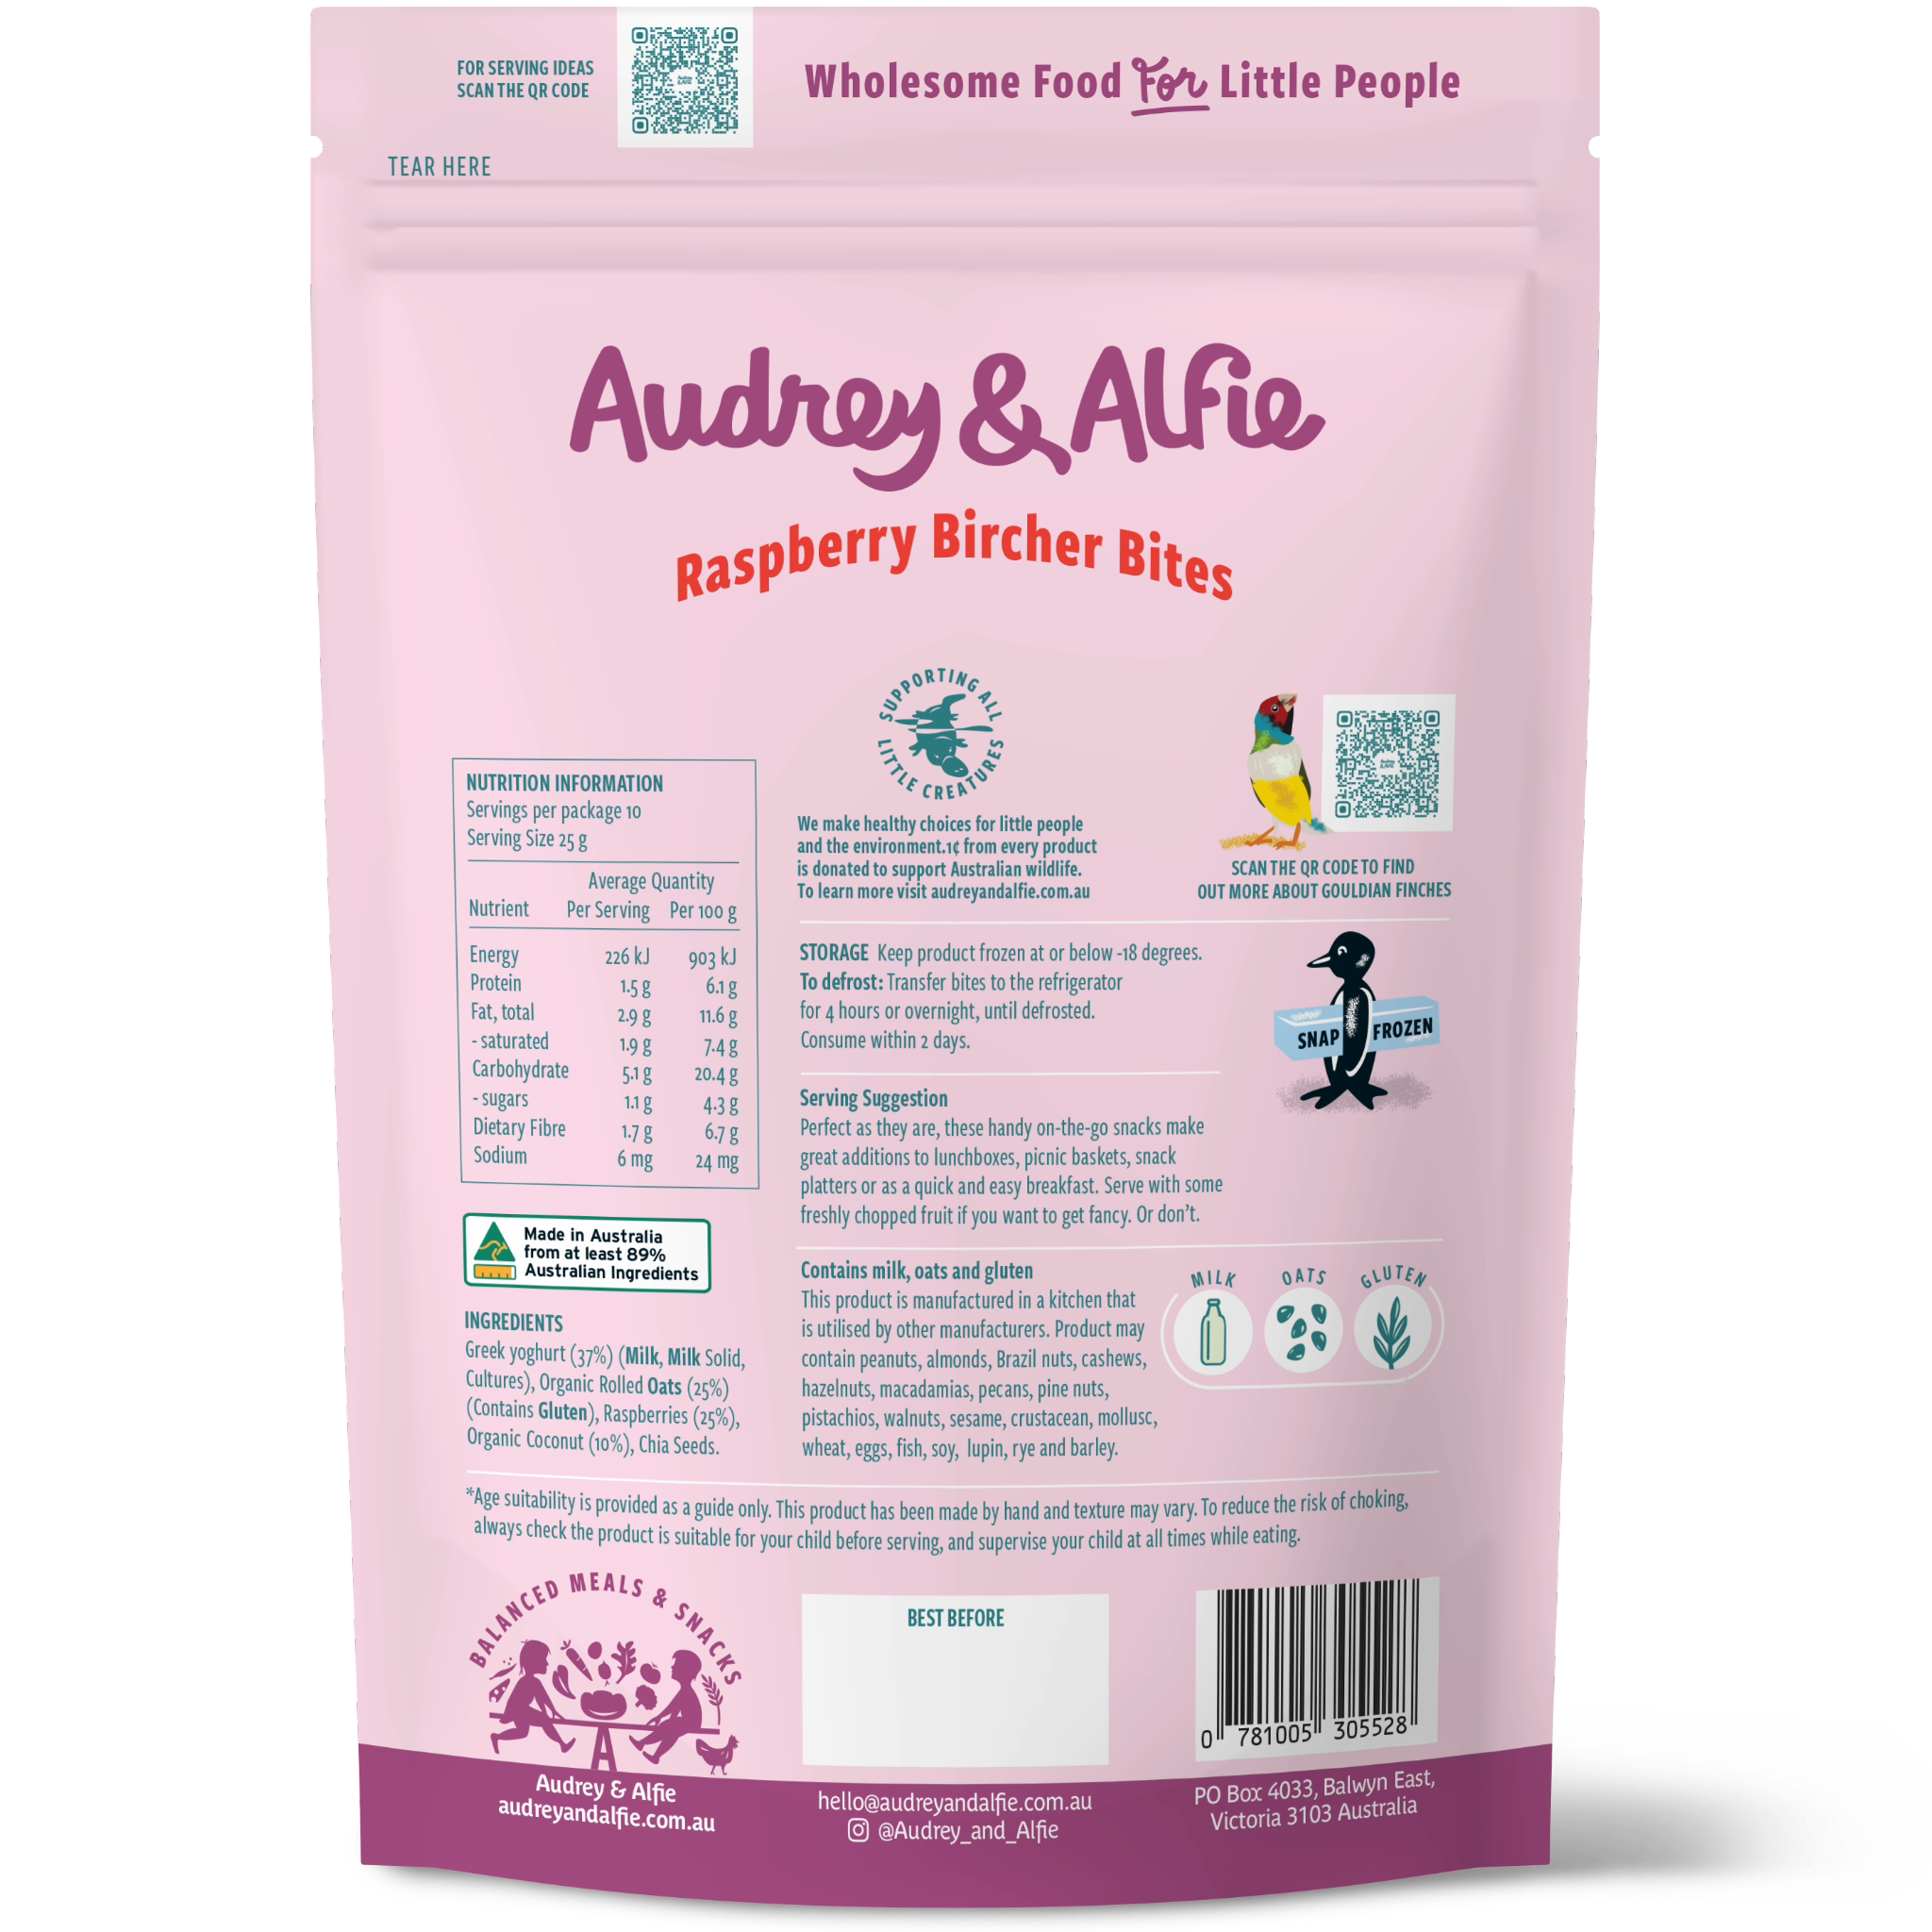 Raspberry Bircher Bites from Audrey and Alfie - Back of Packet with Nutrition Information Panel